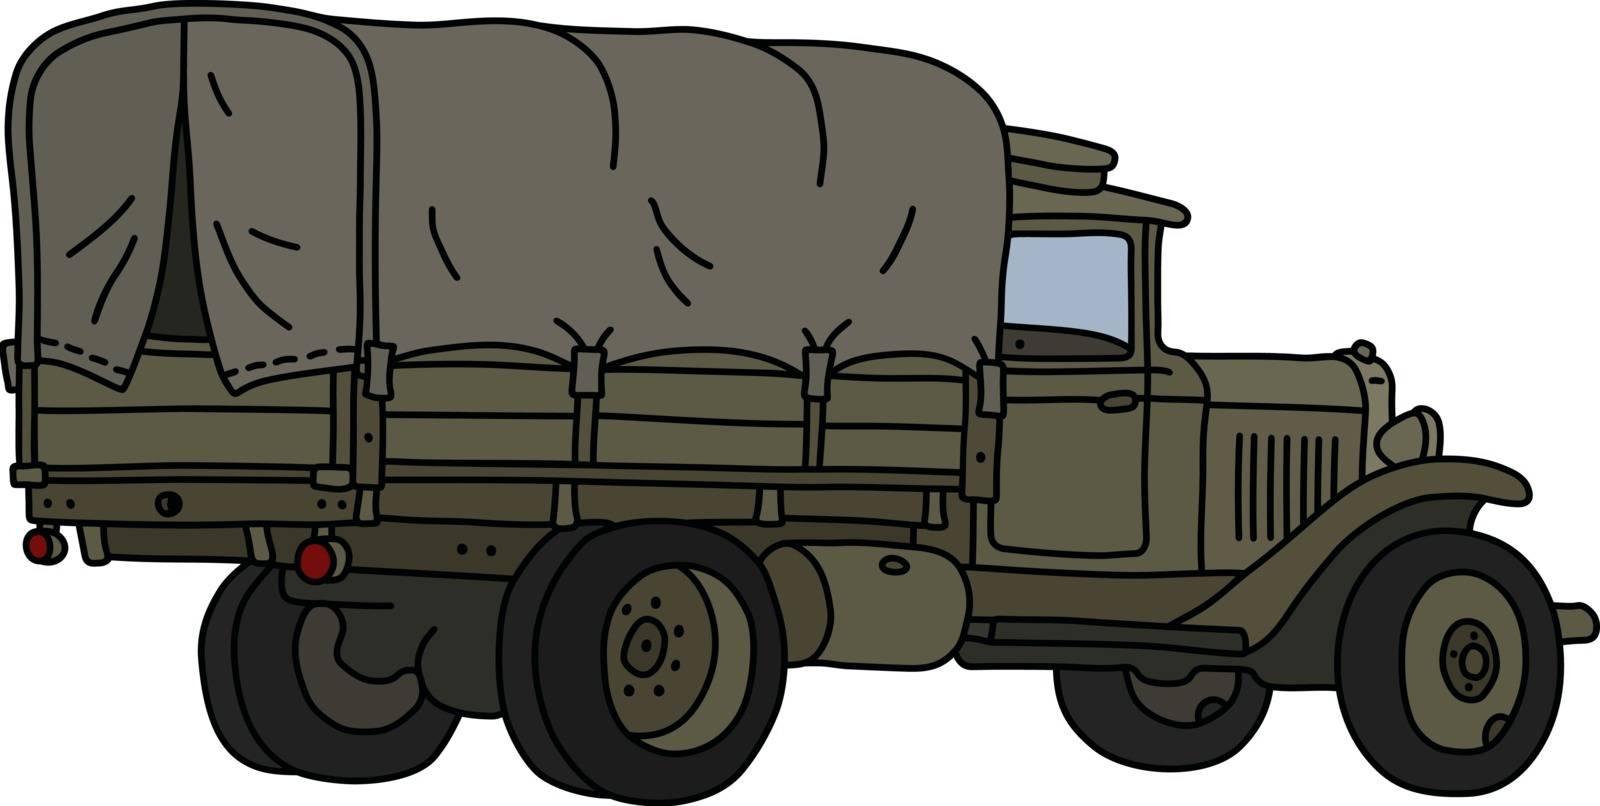 The classic military truck by vostal